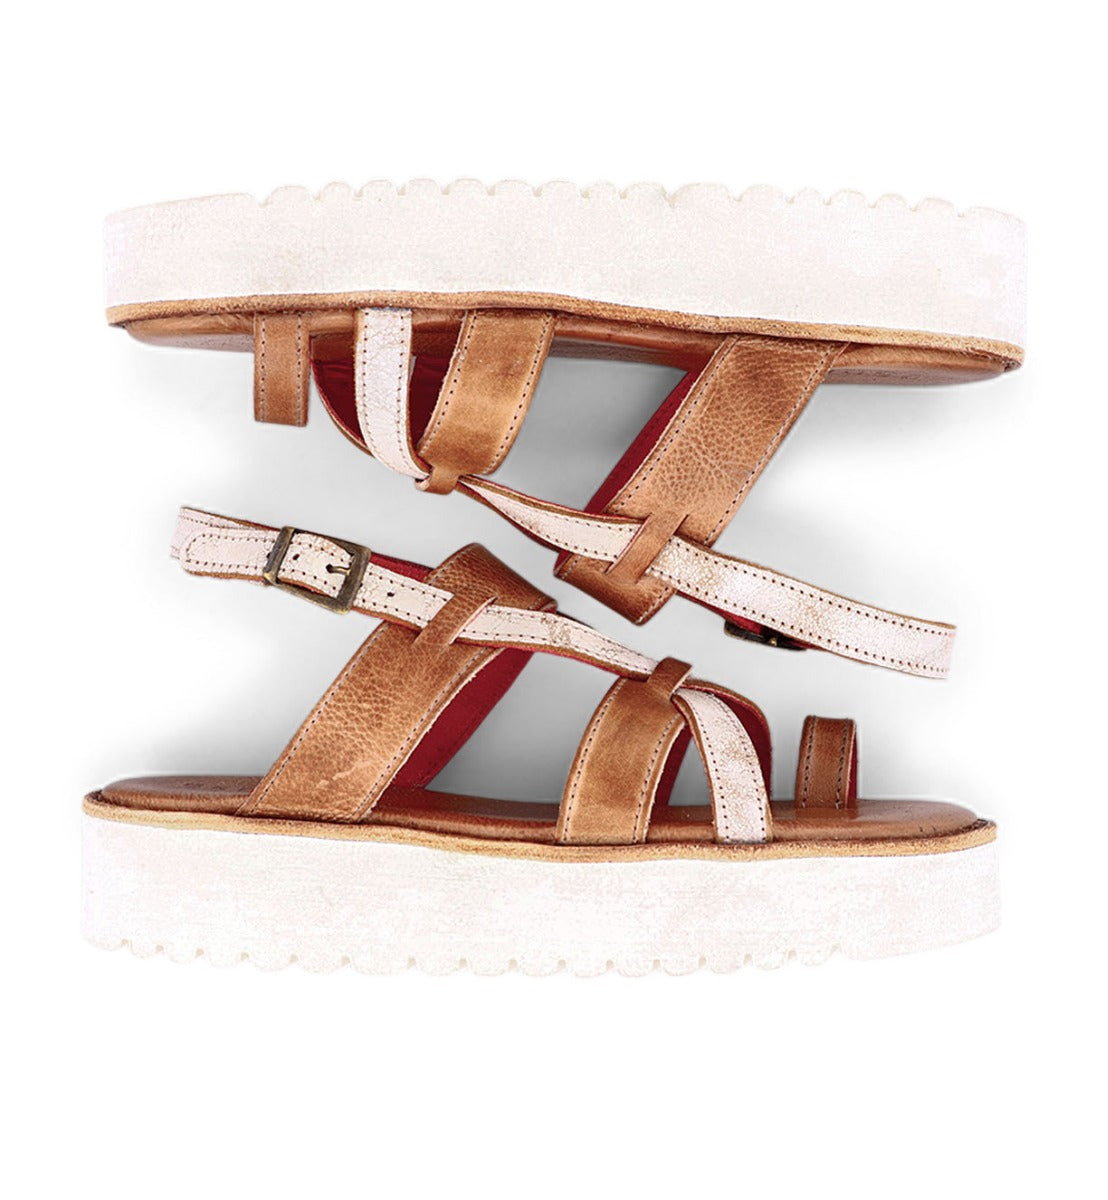 A pair of Bed Stu Crawler sandals with straps.